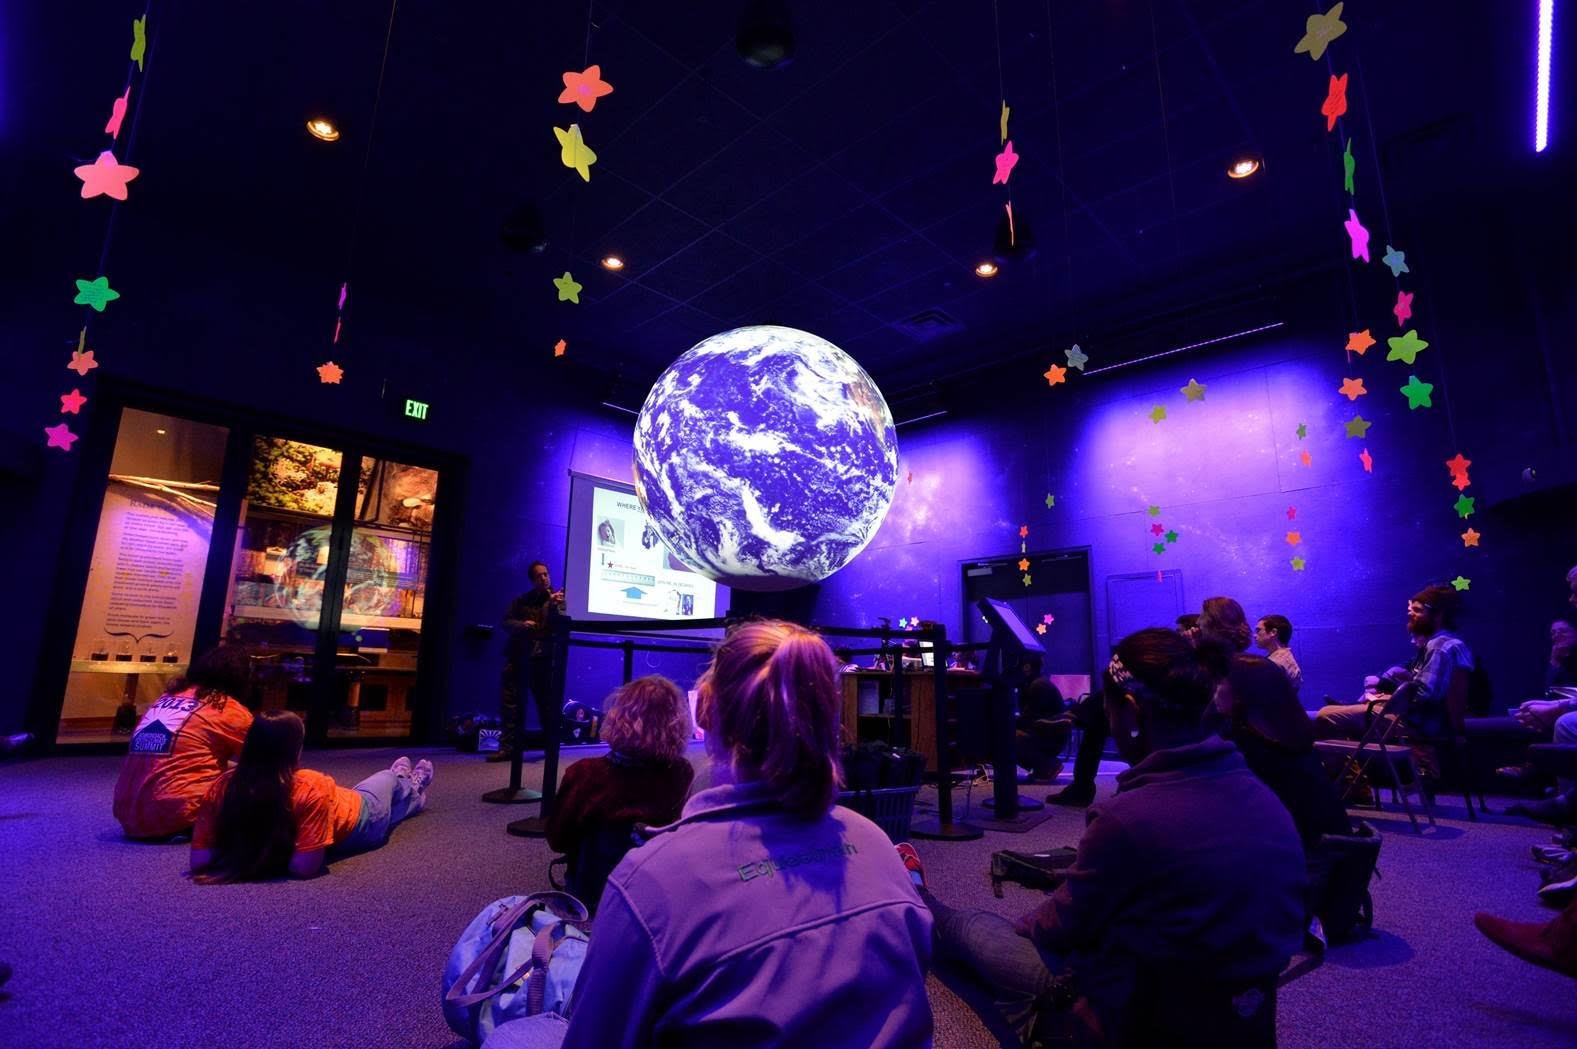 Planet Adirondack exhibit in use for Youth Climate Summit